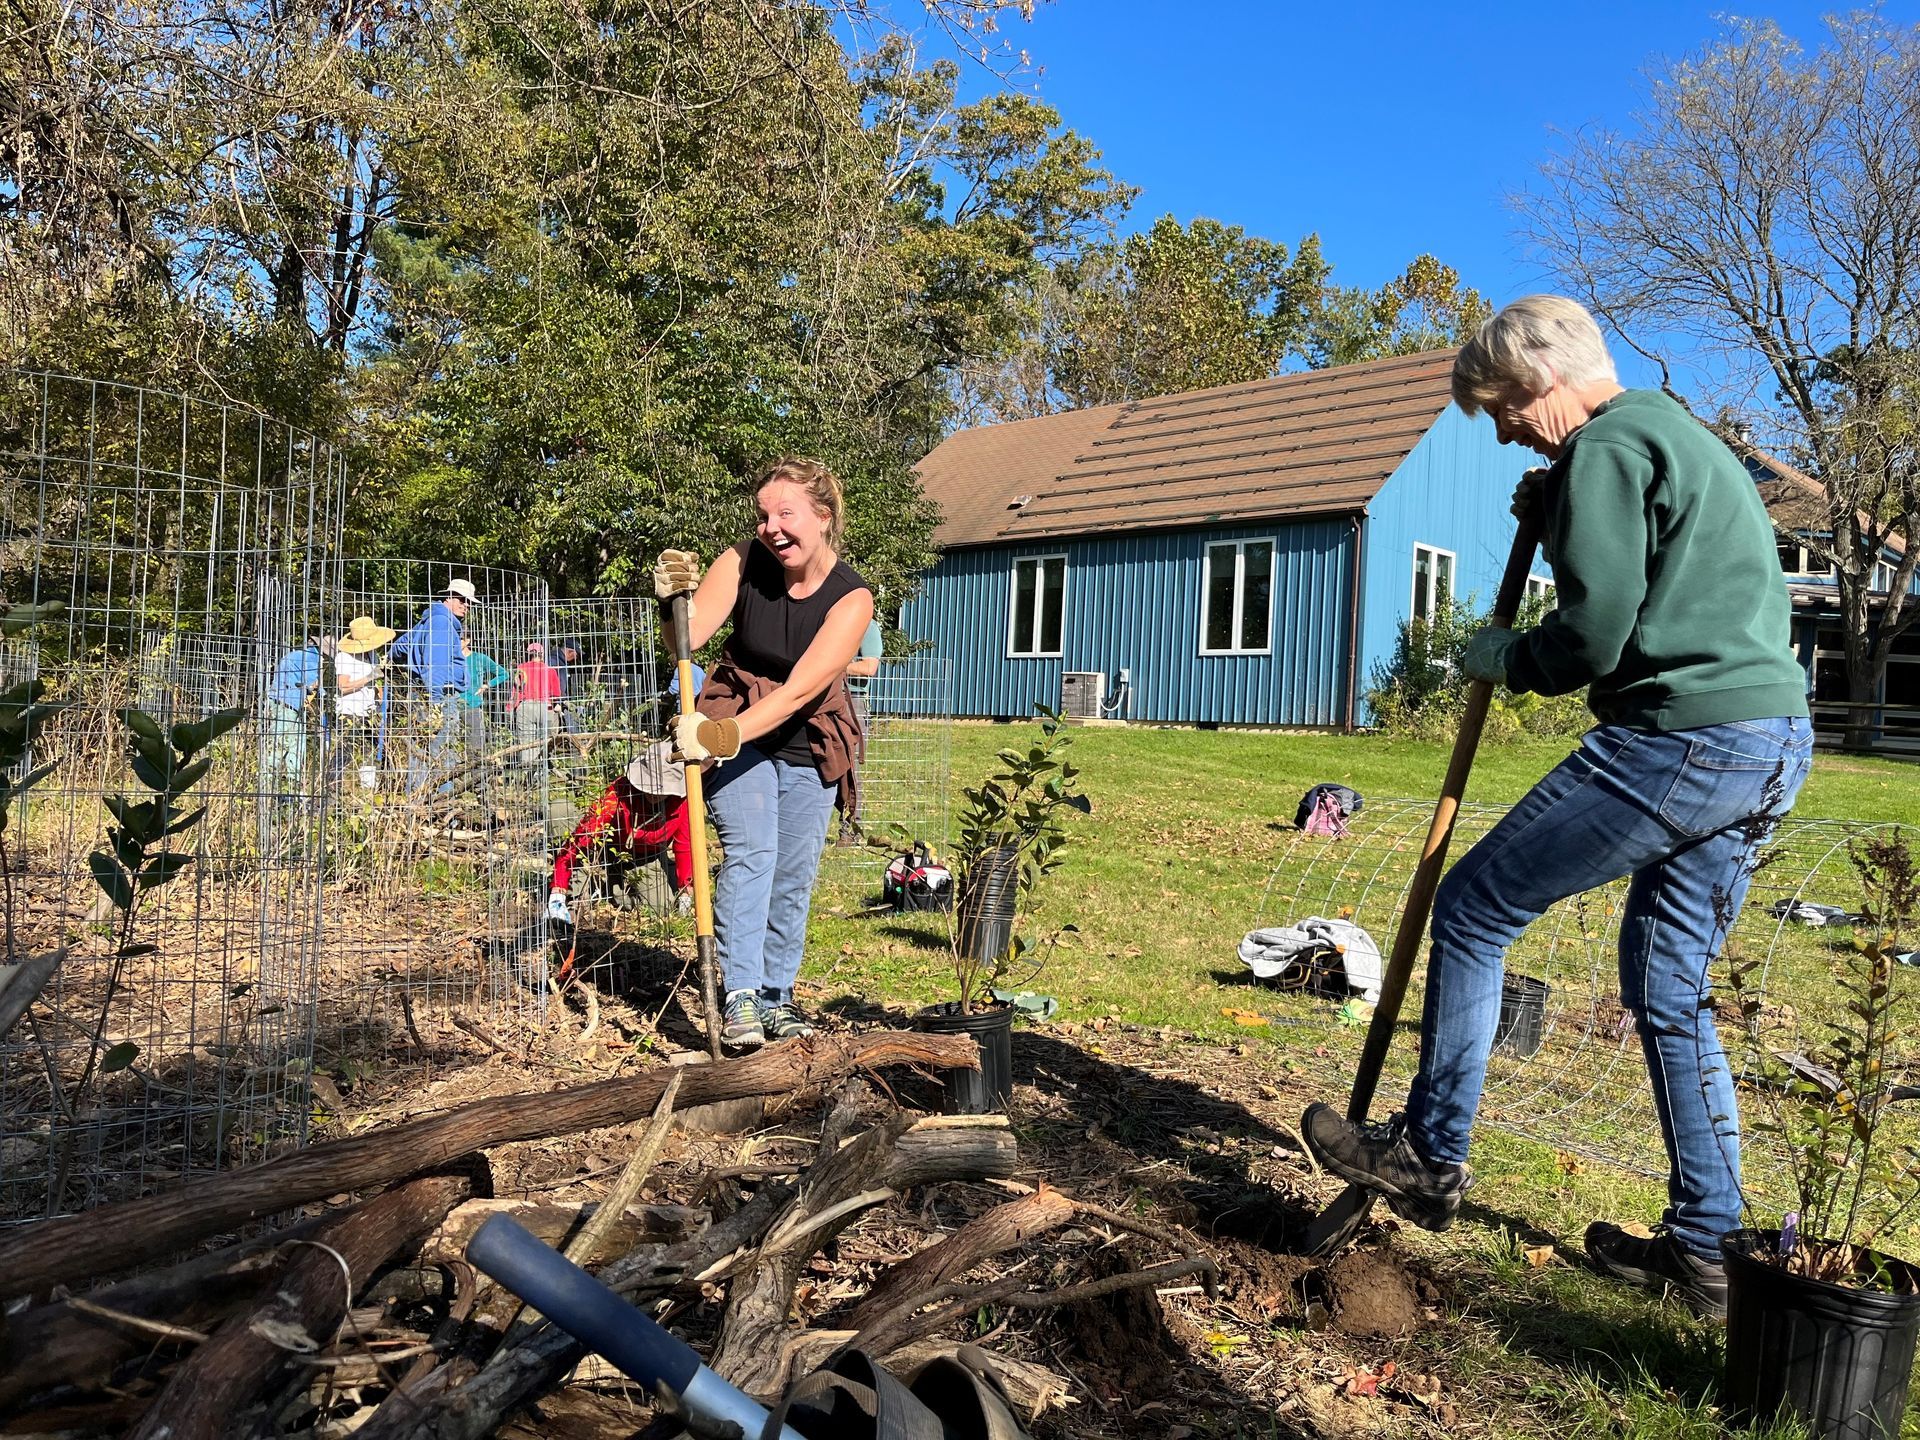 A group of people are working in a garden in front of a house.